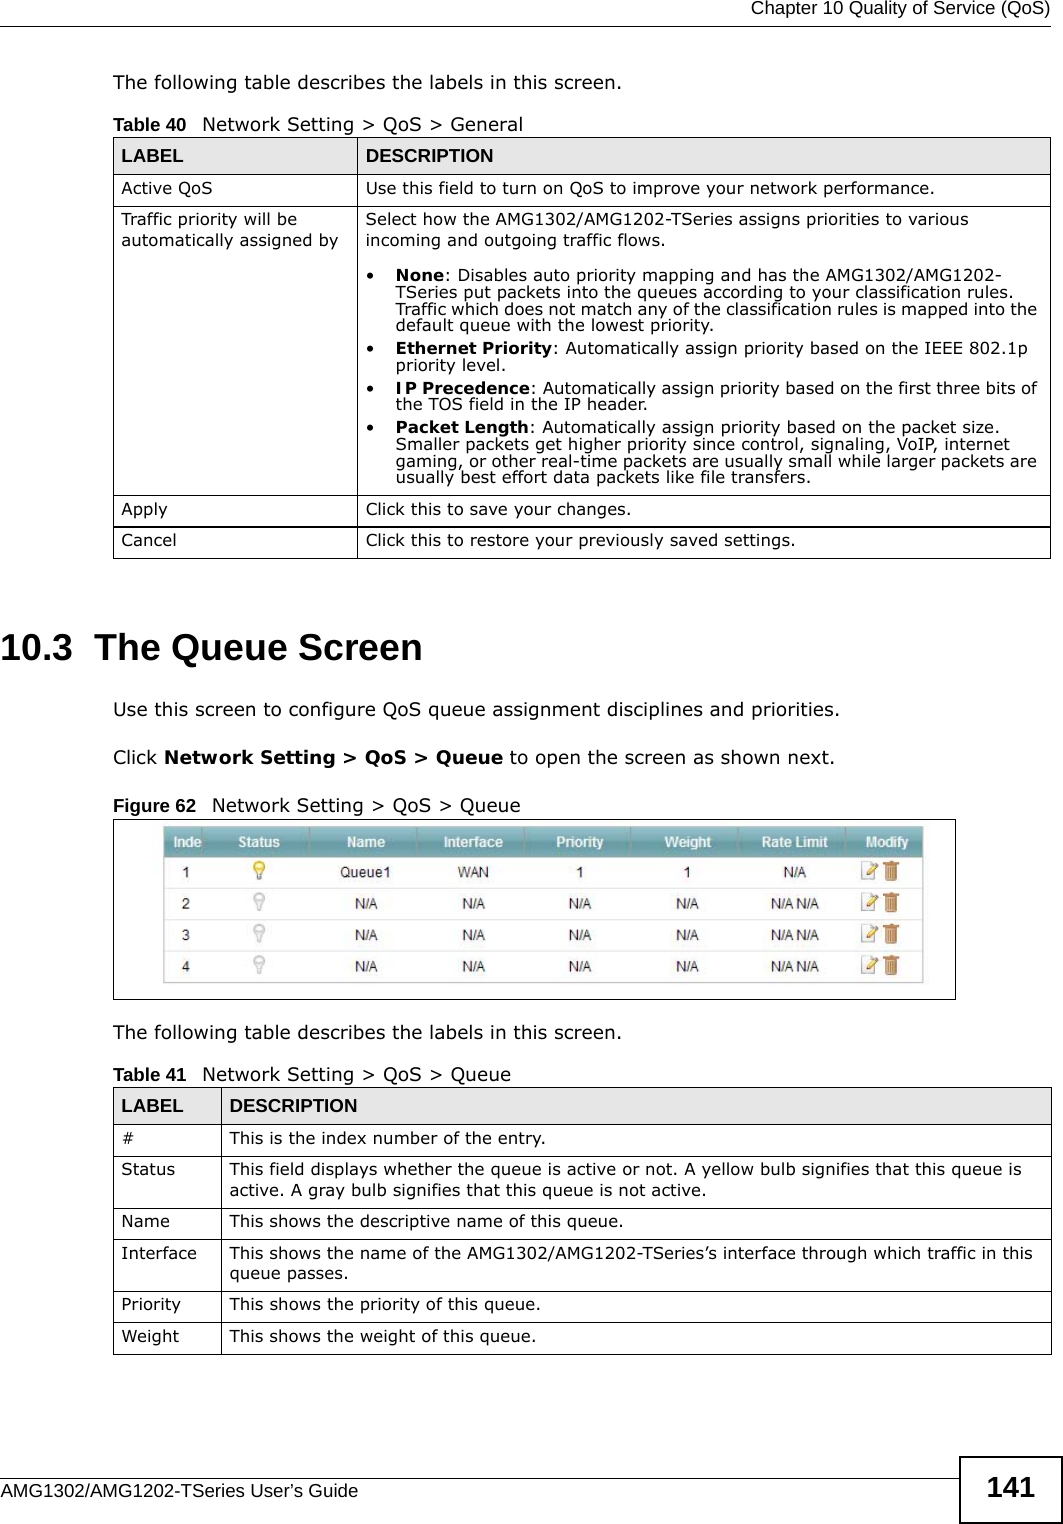  Chapter 10 Quality of Service (QoS)AMG1302/AMG1202-TSeries User’s Guide 141The following table describes the labels in this screen. 10.3  The Queue ScreenUse this screen to configure QoS queue assignment disciplines and priorities.Click Network Setting &gt; QoS &gt; Queue to open the screen as shown next.Figure 62   Network Setting &gt; QoS &gt; QueueThe following table describes the labels in this screen. Table 40   Network Setting &gt; QoS &gt; GeneralLABEL DESCRIPTIONActive QoS Use this field to turn on QoS to improve your network performance.Traffic priority will be automatically assigned by Select how the AMG1302/AMG1202-TSeries assigns priorities to various incoming and outgoing traffic flows.•None: Disables auto priority mapping and has the AMG1302/AMG1202-TSeries put packets into the queues according to your classification rules. Traffic which does not match any of the classification rules is mapped into the default queue with the lowest priority.•Ethernet Priority: Automatically assign priority based on the IEEE 802.1p priority level.•IP Precedence: Automatically assign priority based on the first three bits of the TOS field in the IP header.•Packet Length: Automatically assign priority based on the packet size. Smaller packets get higher priority since control, signaling, VoIP, internet gaming, or other real-time packets are usually small while larger packets are usually best effort data packets like file transfers.Apply Click this to save your changes.Cancel Click this to restore your previously saved settings.Table 41   Network Setting &gt; QoS &gt; QueueLABEL DESCRIPTION#This is the index number of the entry.Status This field displays whether the queue is active or not. A yellow bulb signifies that this queue is active. A gray bulb signifies that this queue is not active.Name This shows the descriptive name of this queue.Interface This shows the name of the AMG1302/AMG1202-TSeries’s interface through which traffic in this queue passes.Priority This shows the priority of this queue.Weight This shows the weight of this queue.